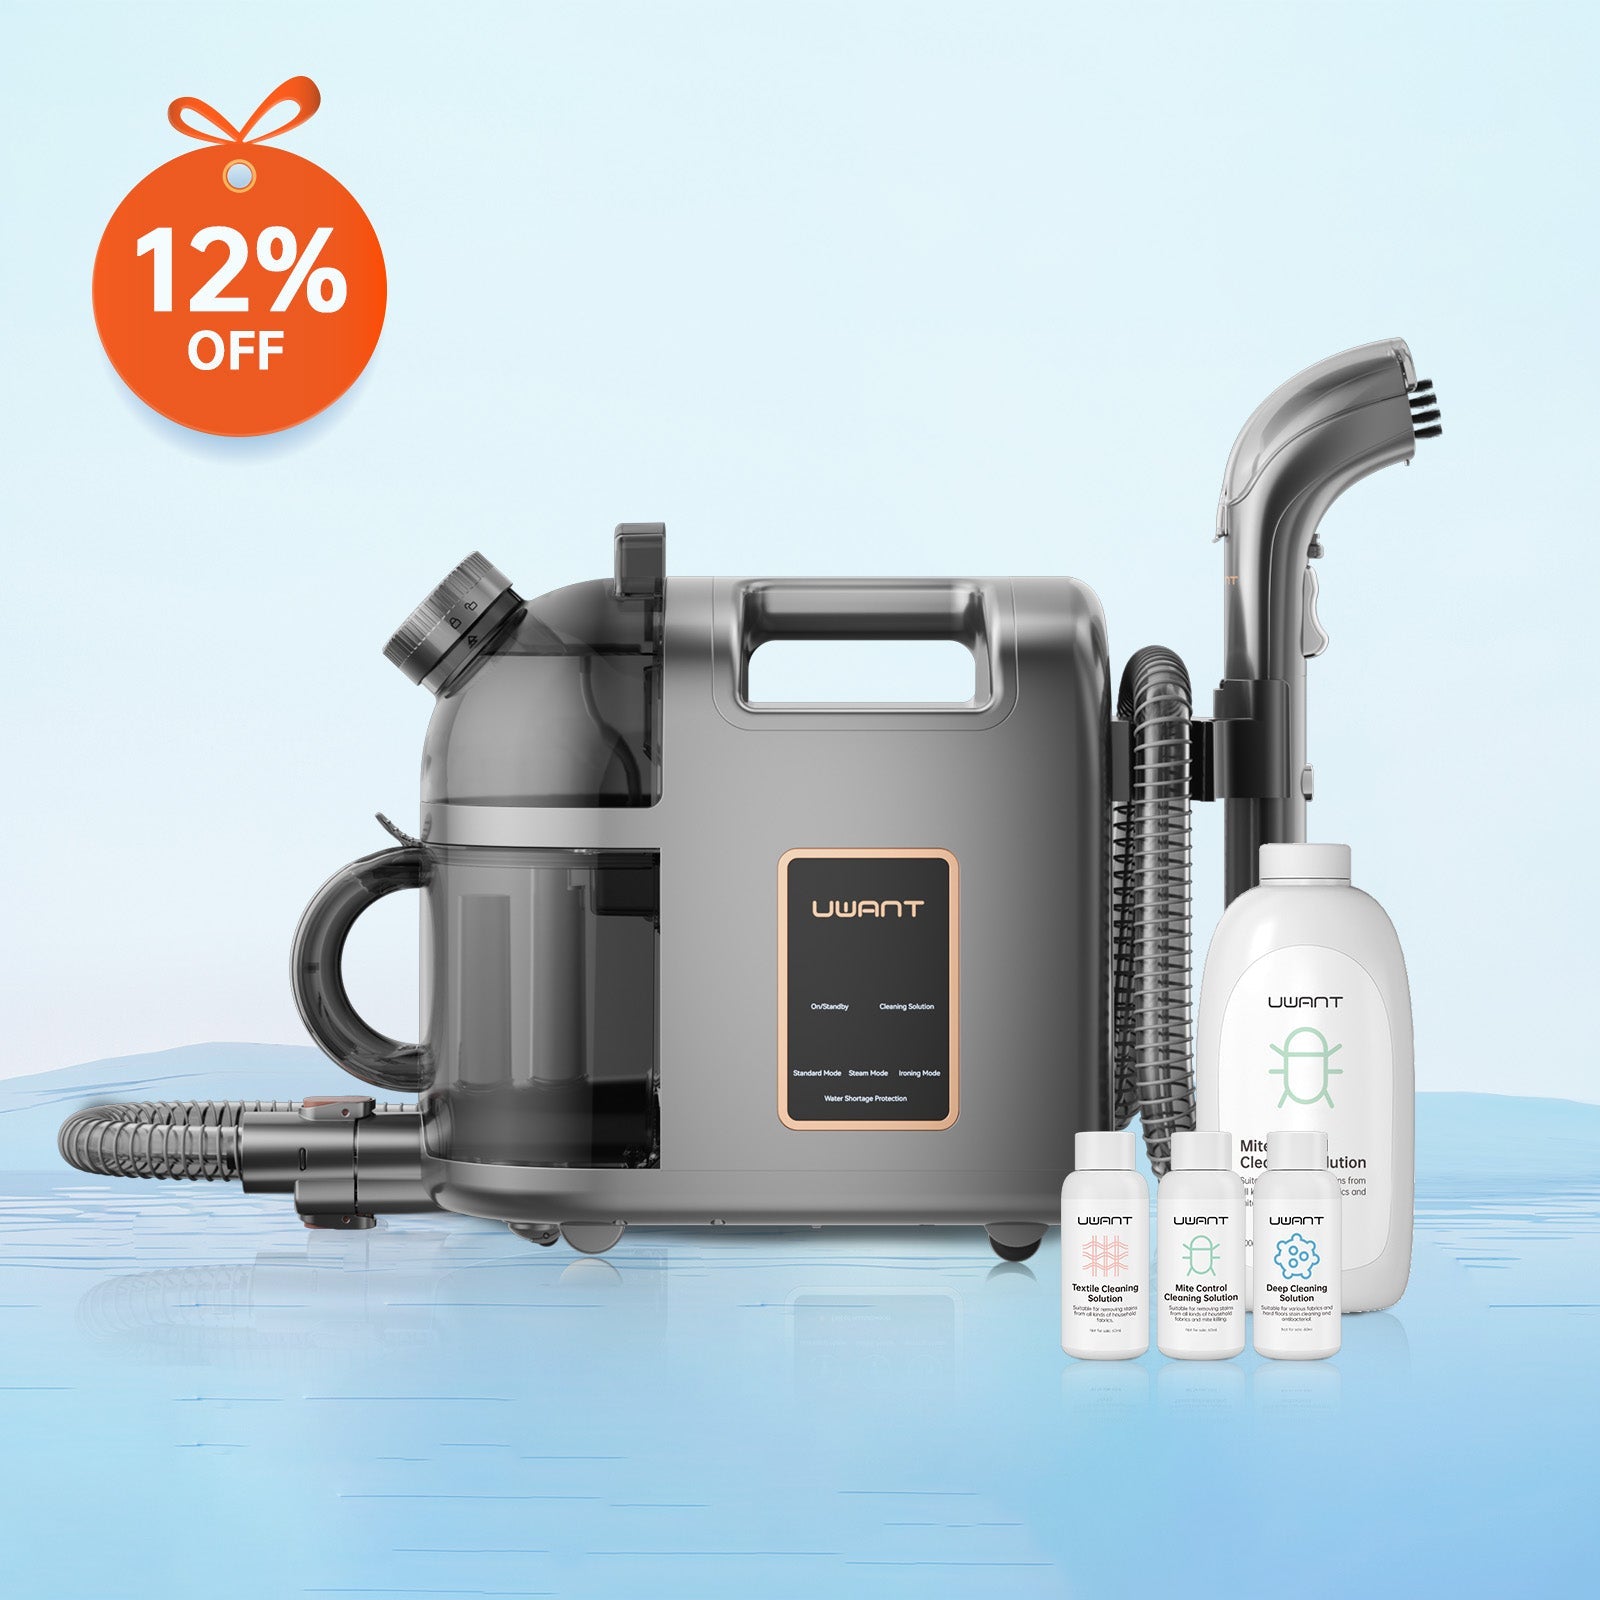 UWANT EuropeUWANT B200 12% 0FF SET (With Cleaning Solution)